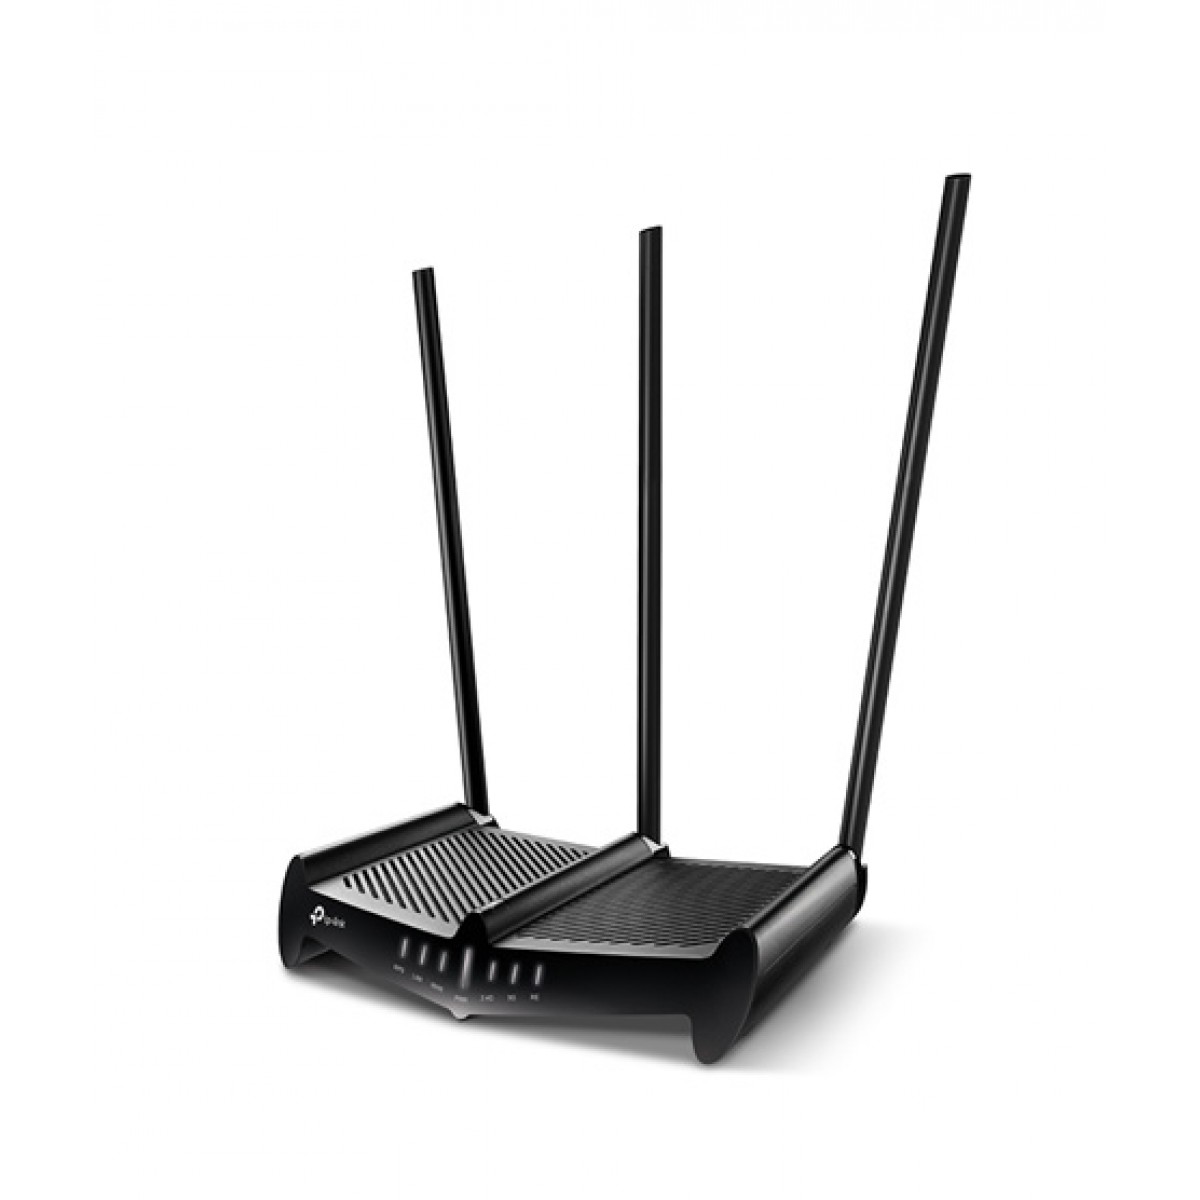 Harga Jual TP-Link Archer C58HP AC1350 High Power Wireless Dual Band Router